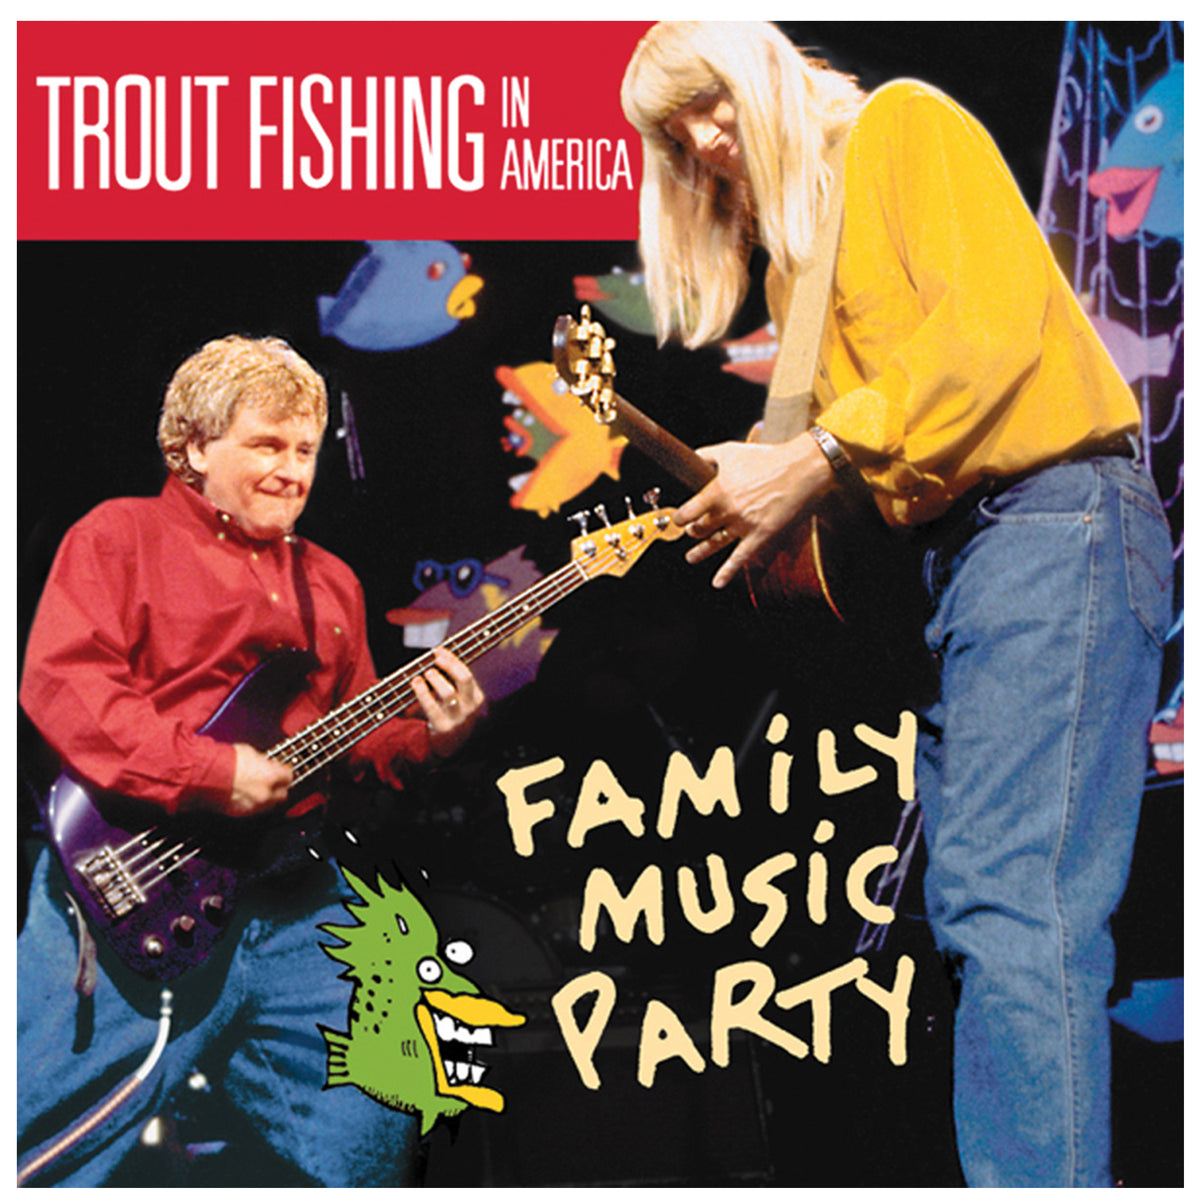 Family Music Party – Trout Fishing in America